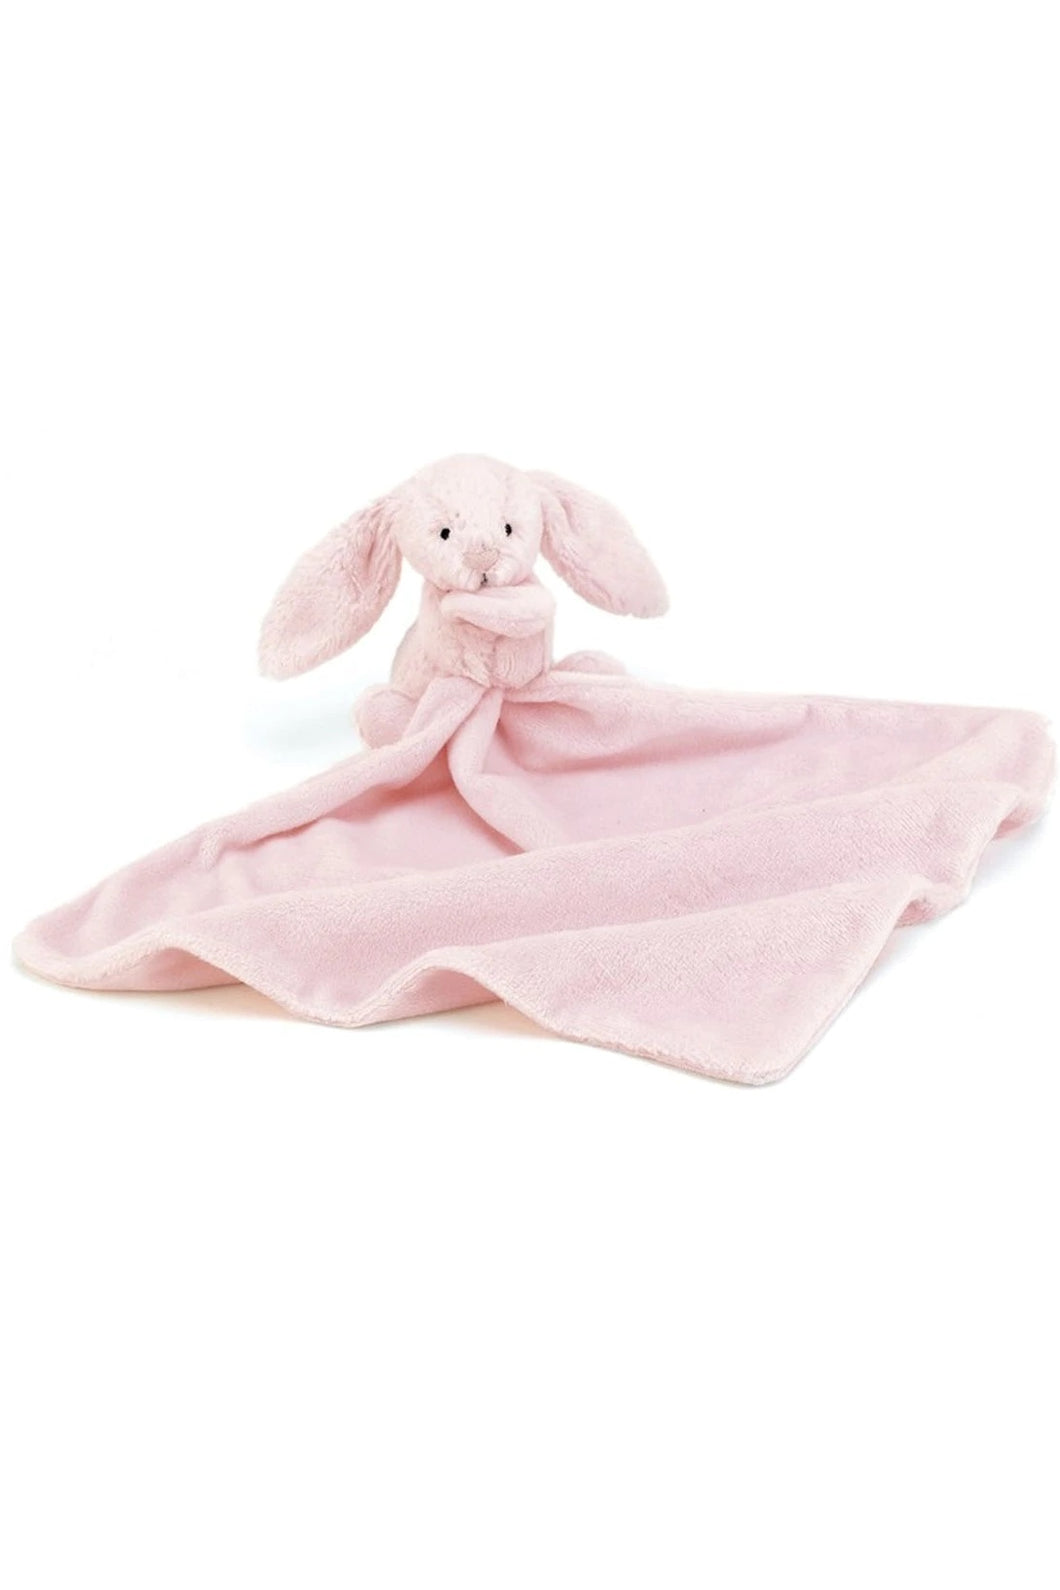 Jellycat Bashful Pink Bunny Soother 1